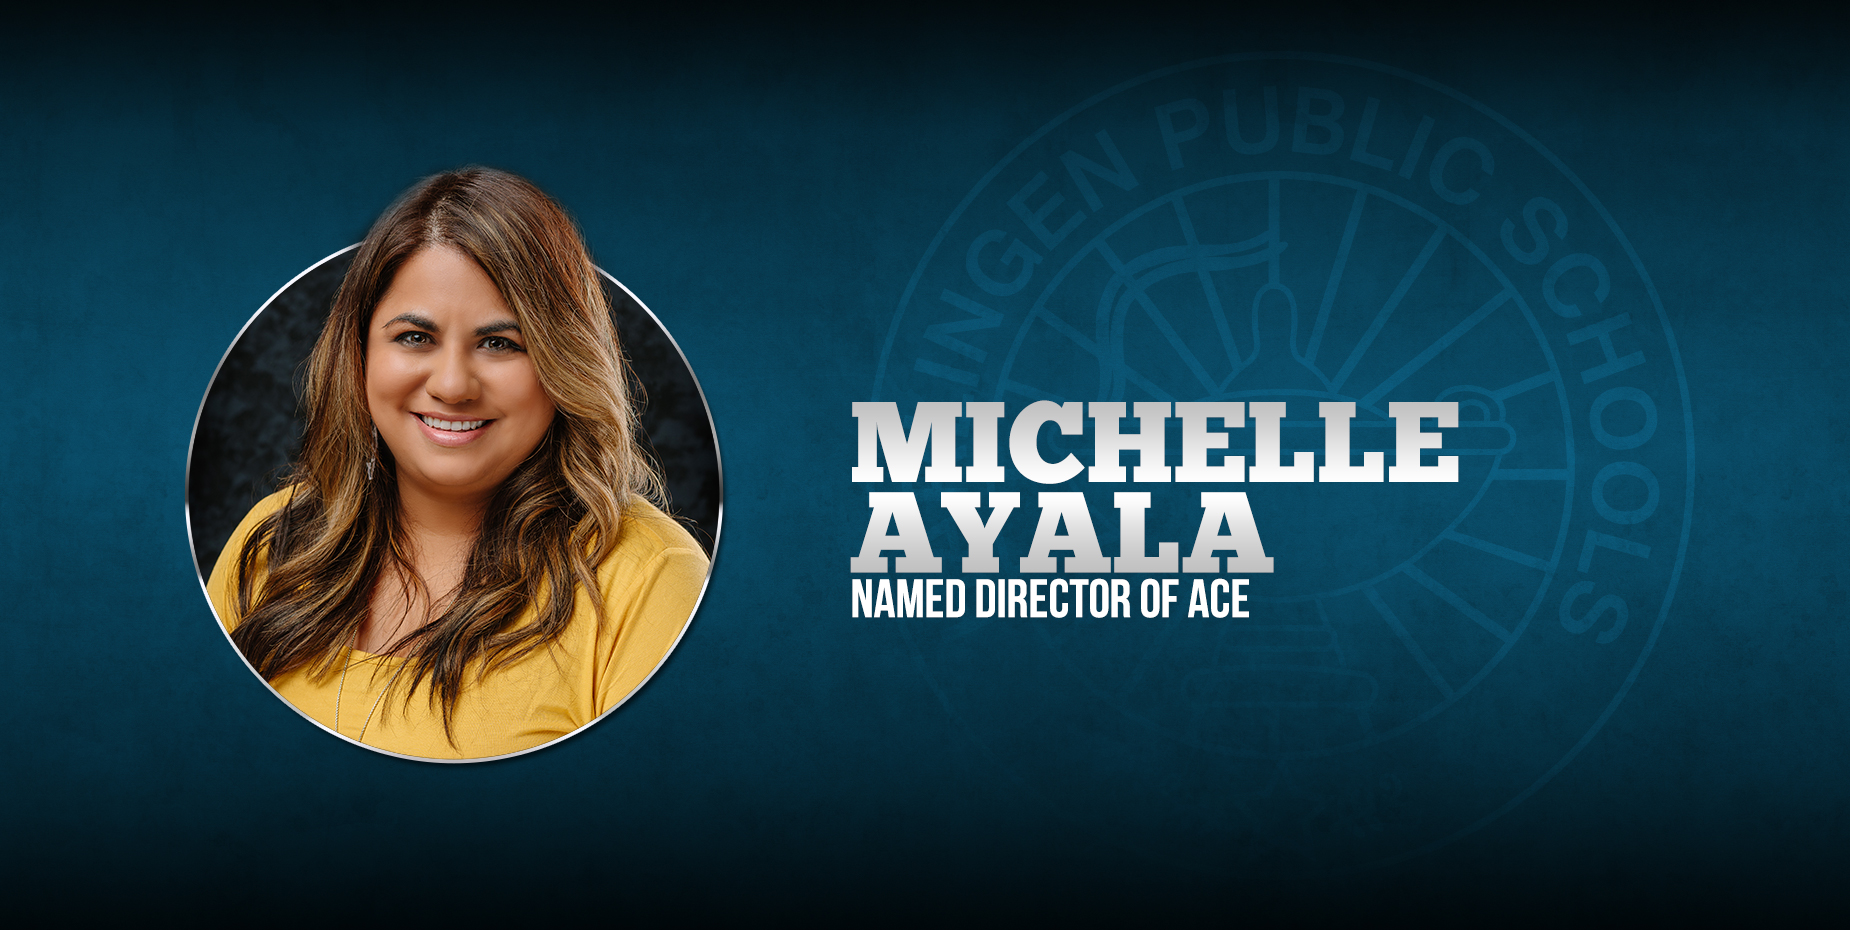 Michelle Ayala named Director of ACE